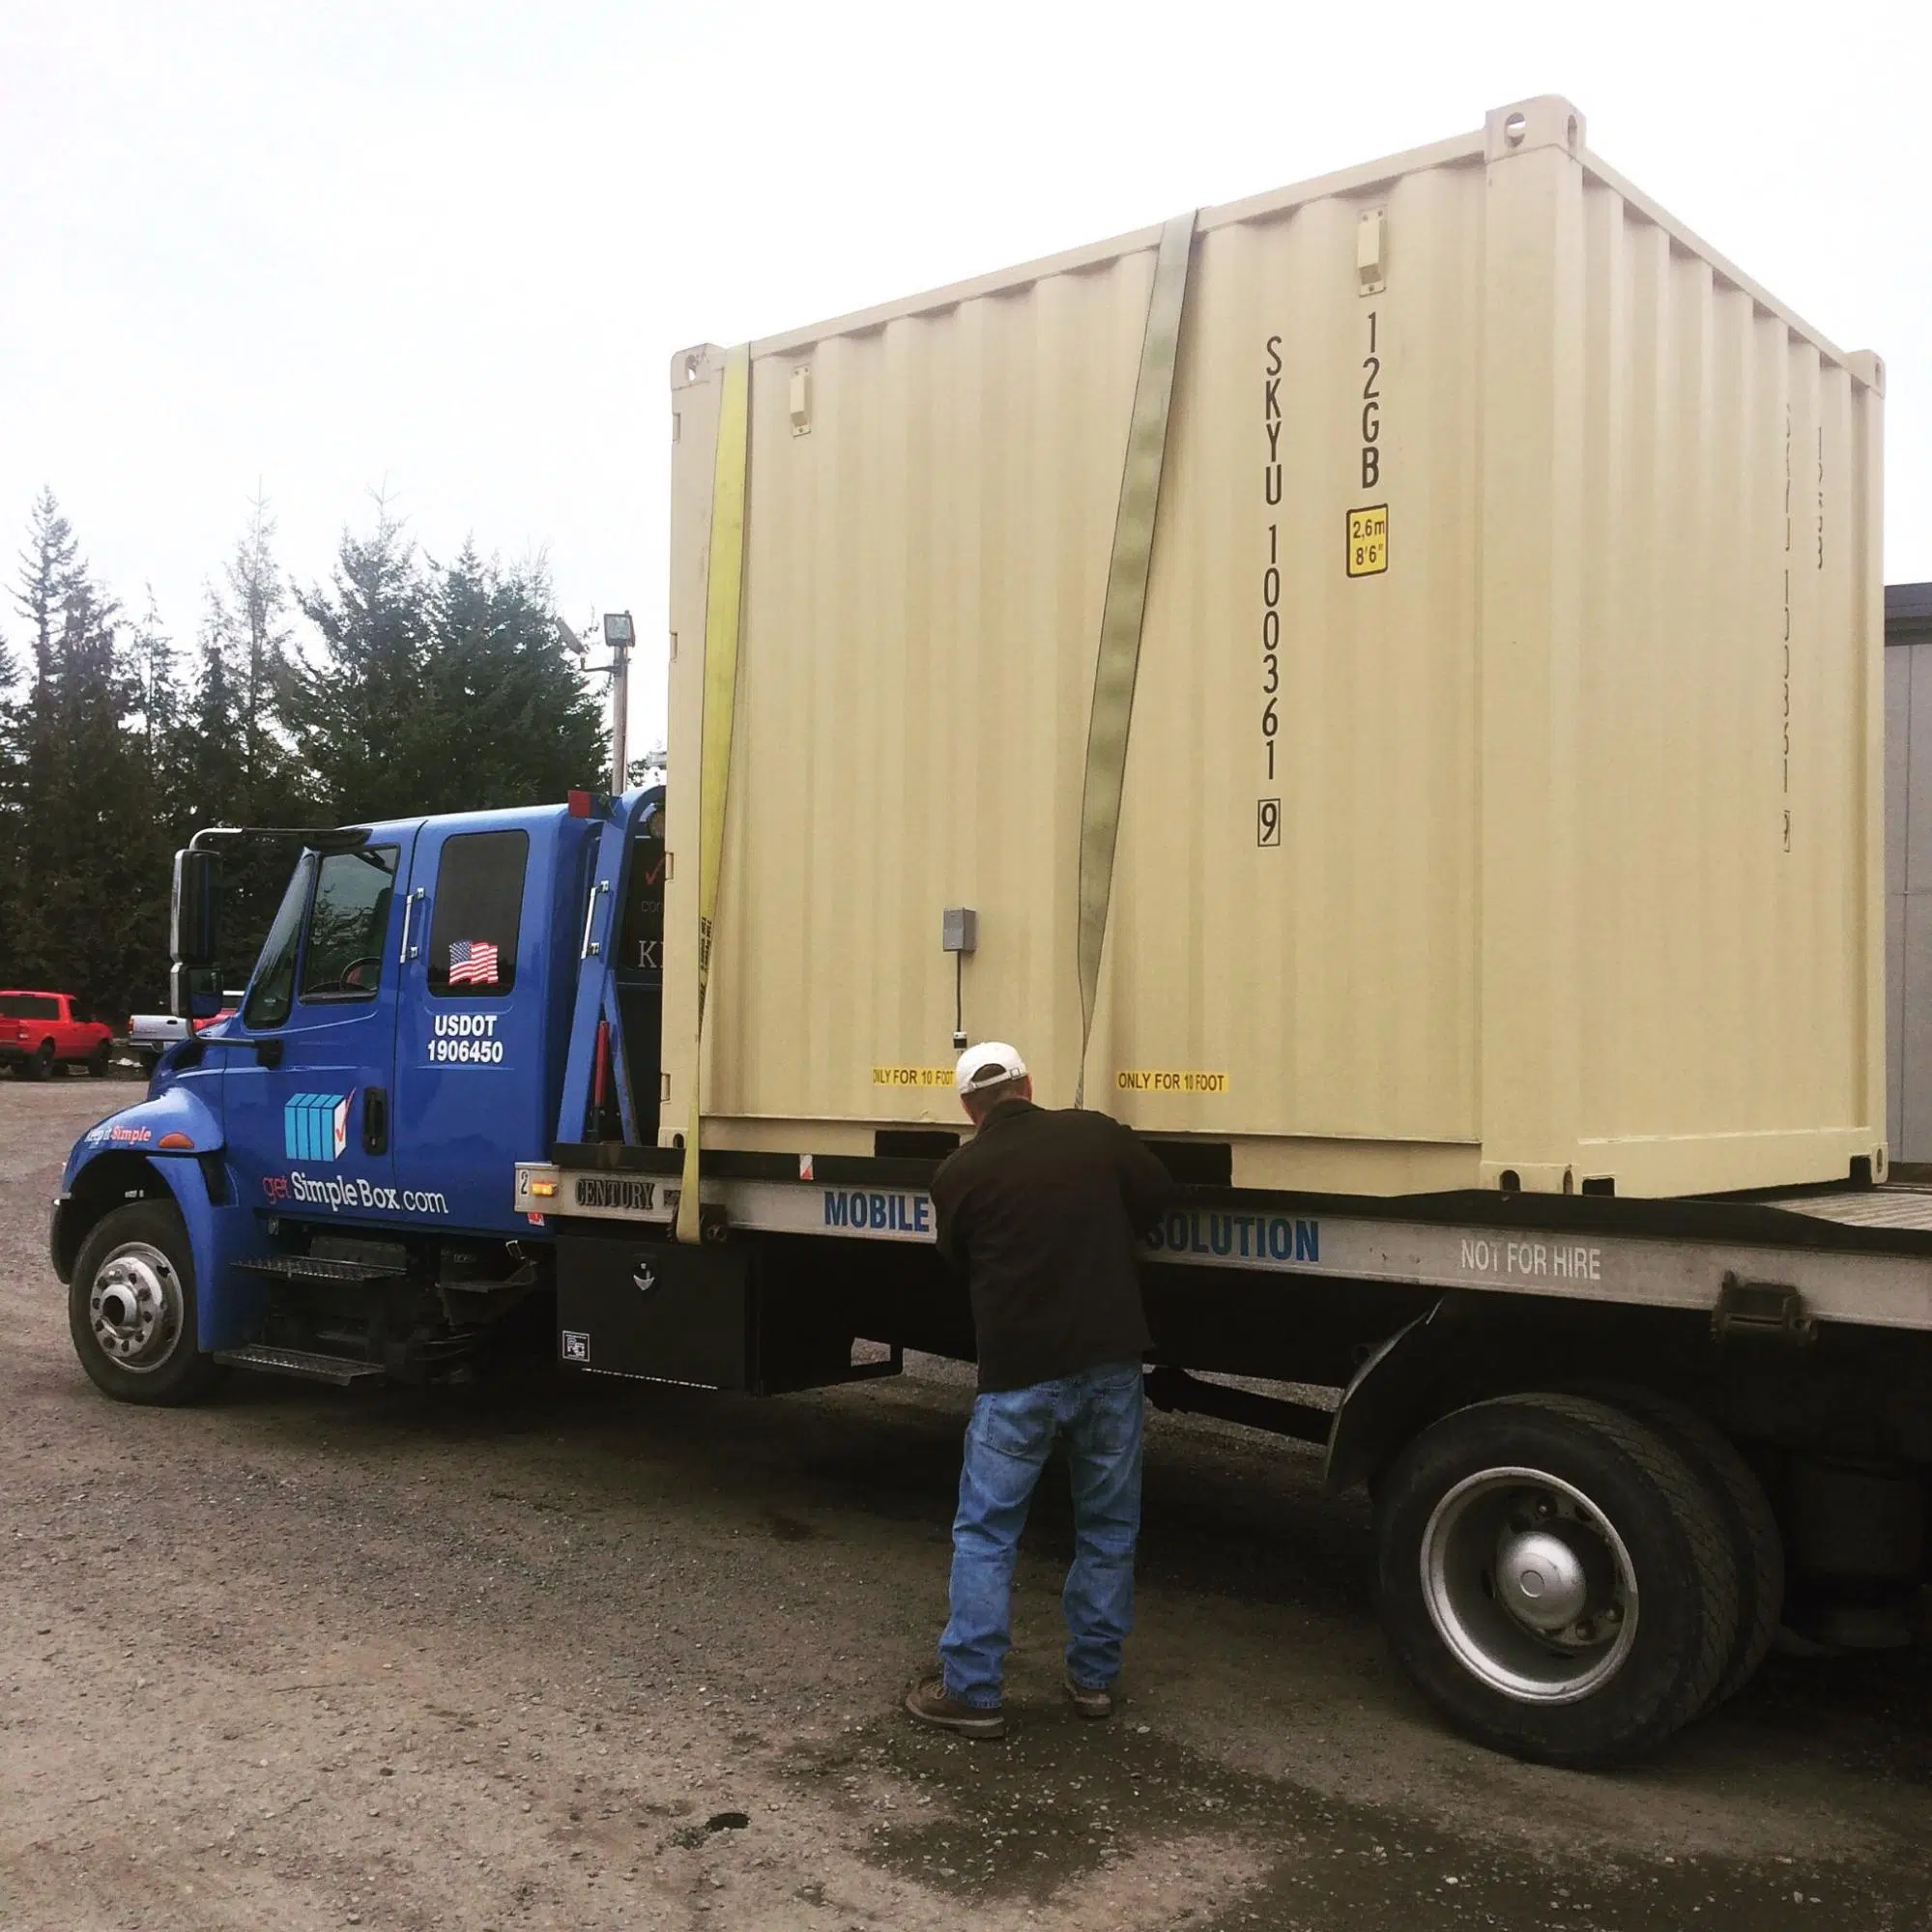 10 foot shipping container ready to be delivered loaded at a truck.